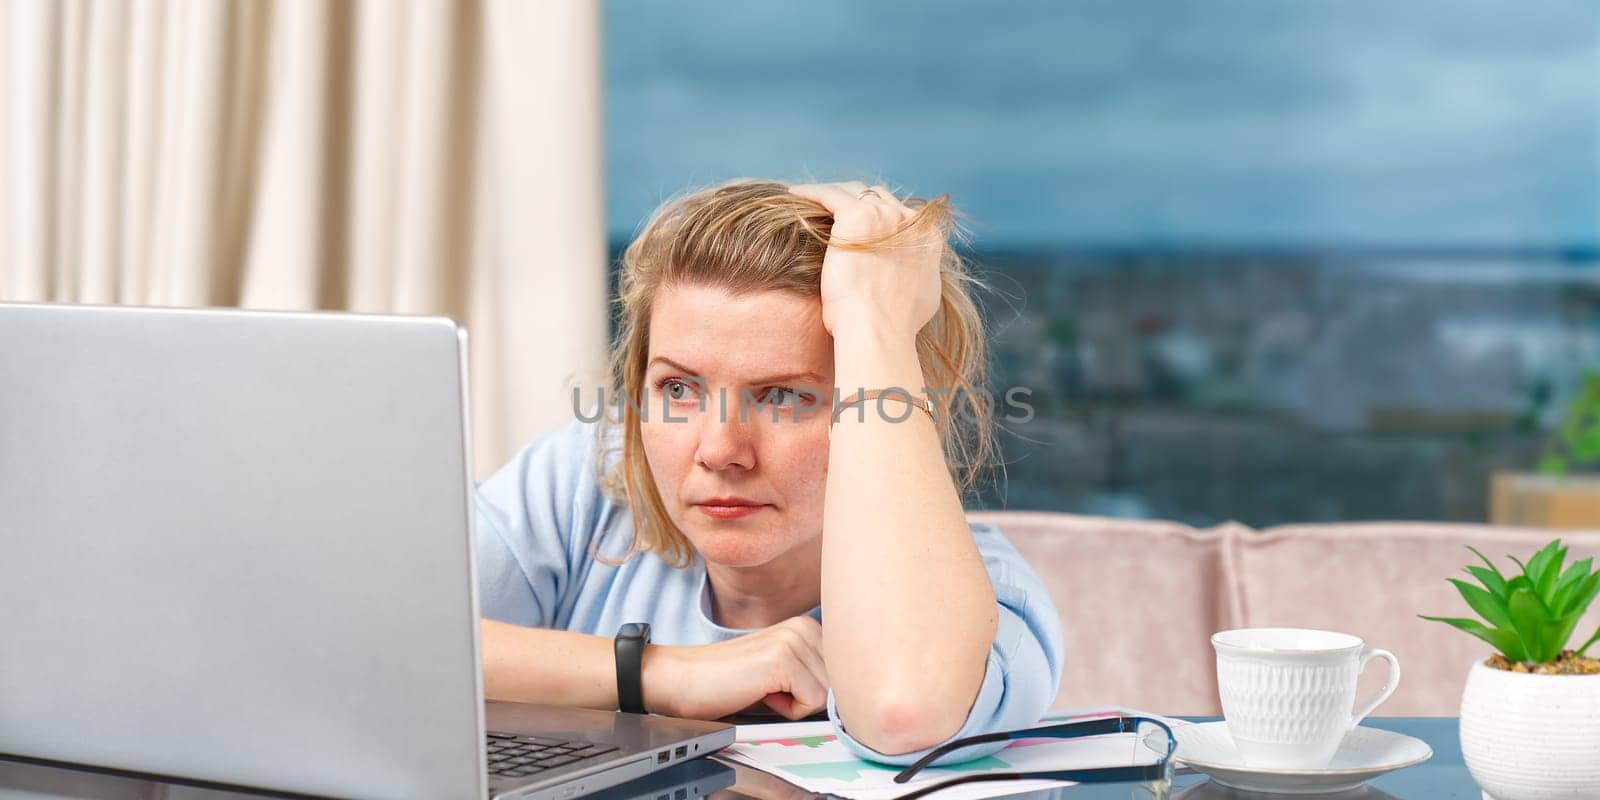 Unhappy tired woman at home office working with laptop. Stress, depression, loneliness, fatigue, burnout concept. Businesswoman work at computer, feeling unwell, suffering from stress, headache.